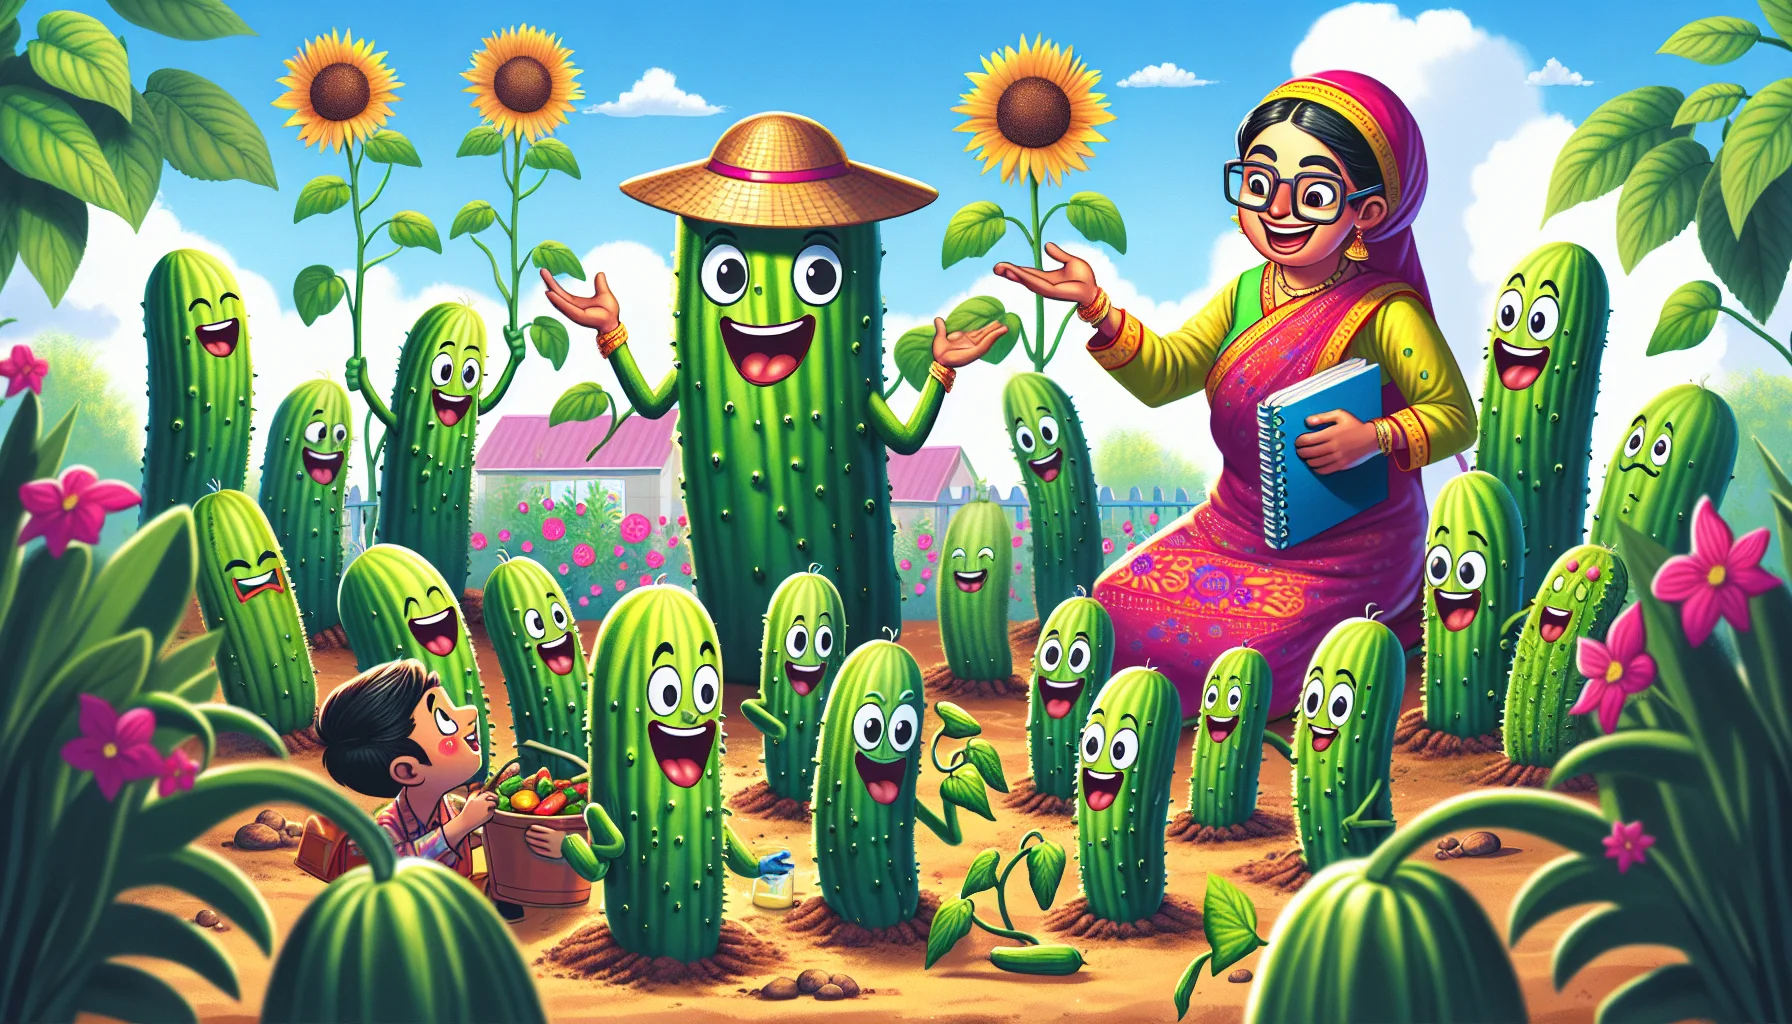 Create a humorous and enticing image illustrating the process of growing pickling cucumbers. Imagine a scenario where a jovial South Asian woman, wearing vibrant gardening attire, is seen actively instructing a group of plants, as if they were students, on how to grow properly. The plants are anthropomorphized with eyes and smiles, excitedly interacting and learning from their 'teacher'. Among the plants, the pickling cucumber plants stand out, thriving vibrantly. The background of the image is a lush and colourful garden under a sunny sky, emphasizing the joy and rewards of gardening.